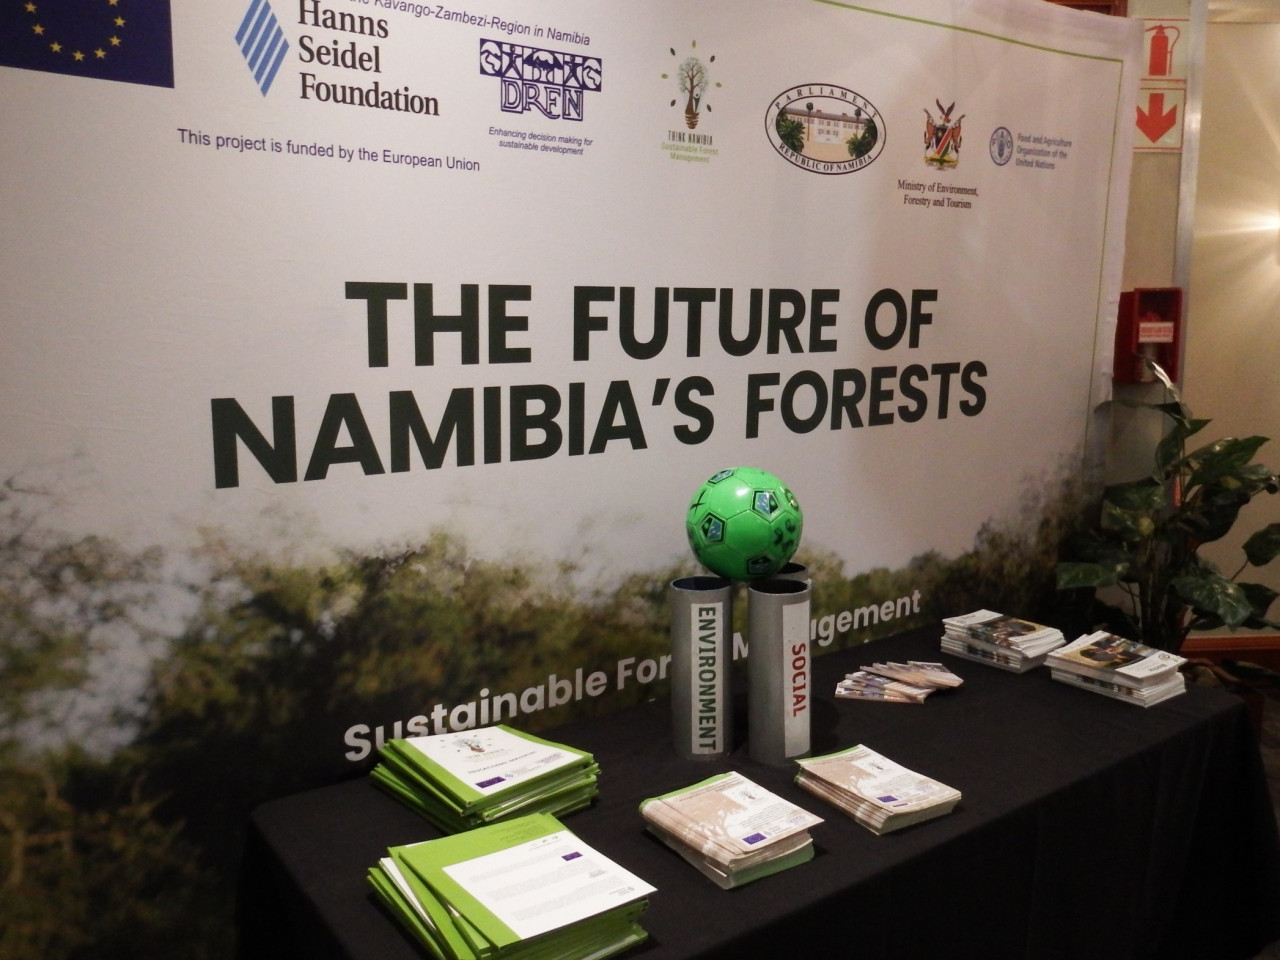 Symposium: The Role of Forests in Sustainable Development